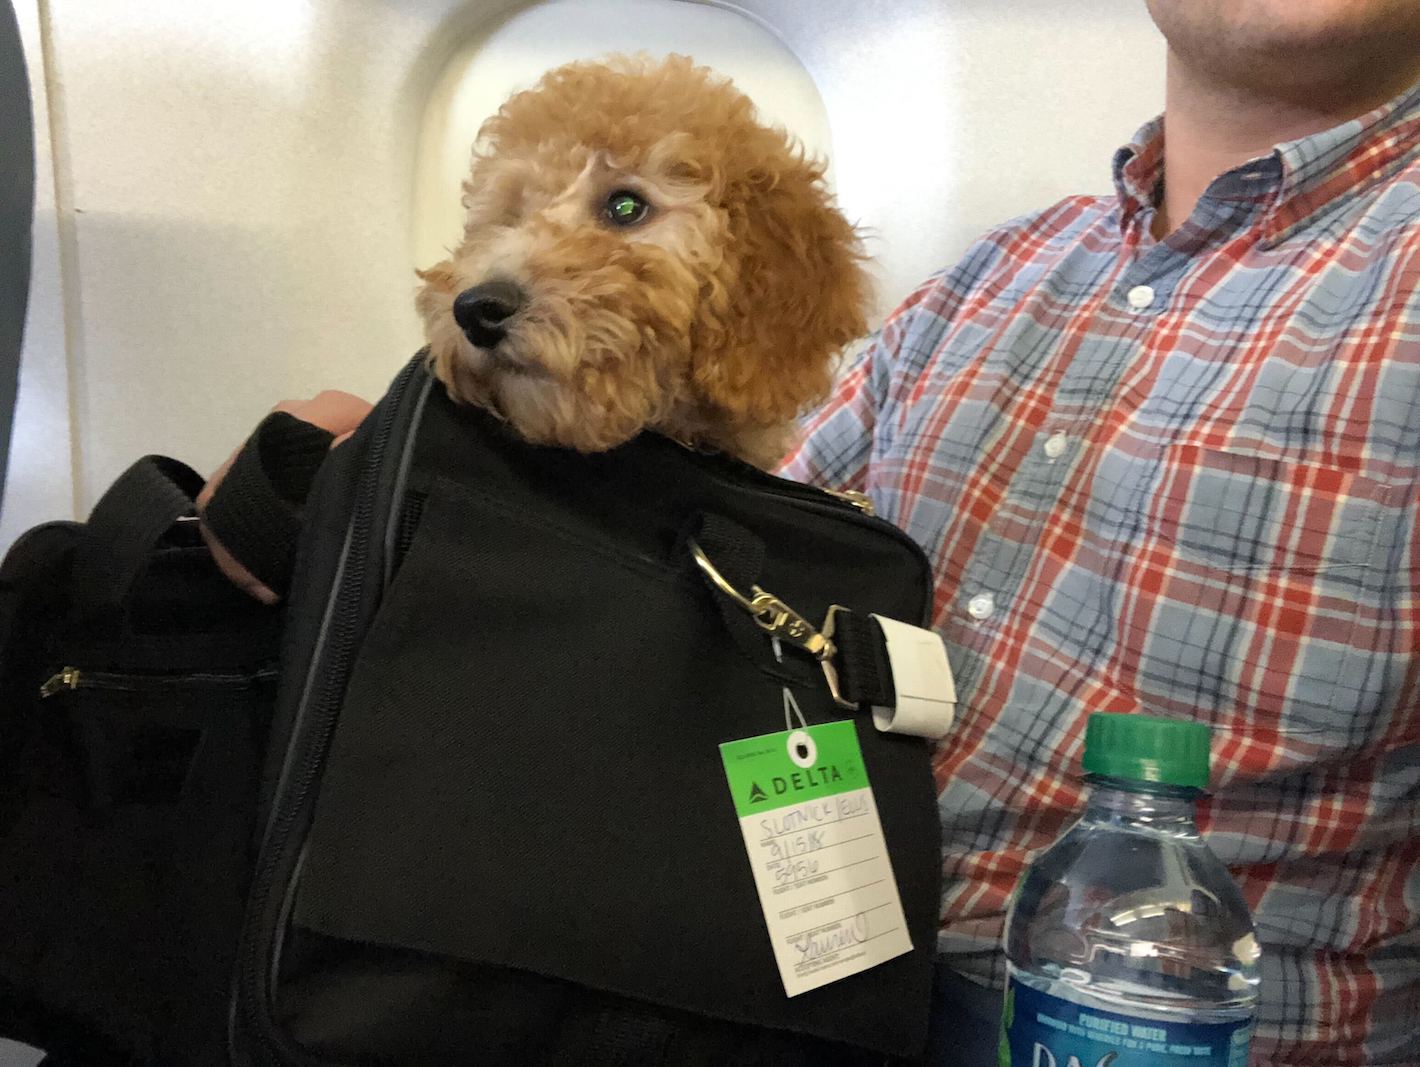 travel with dog airplane